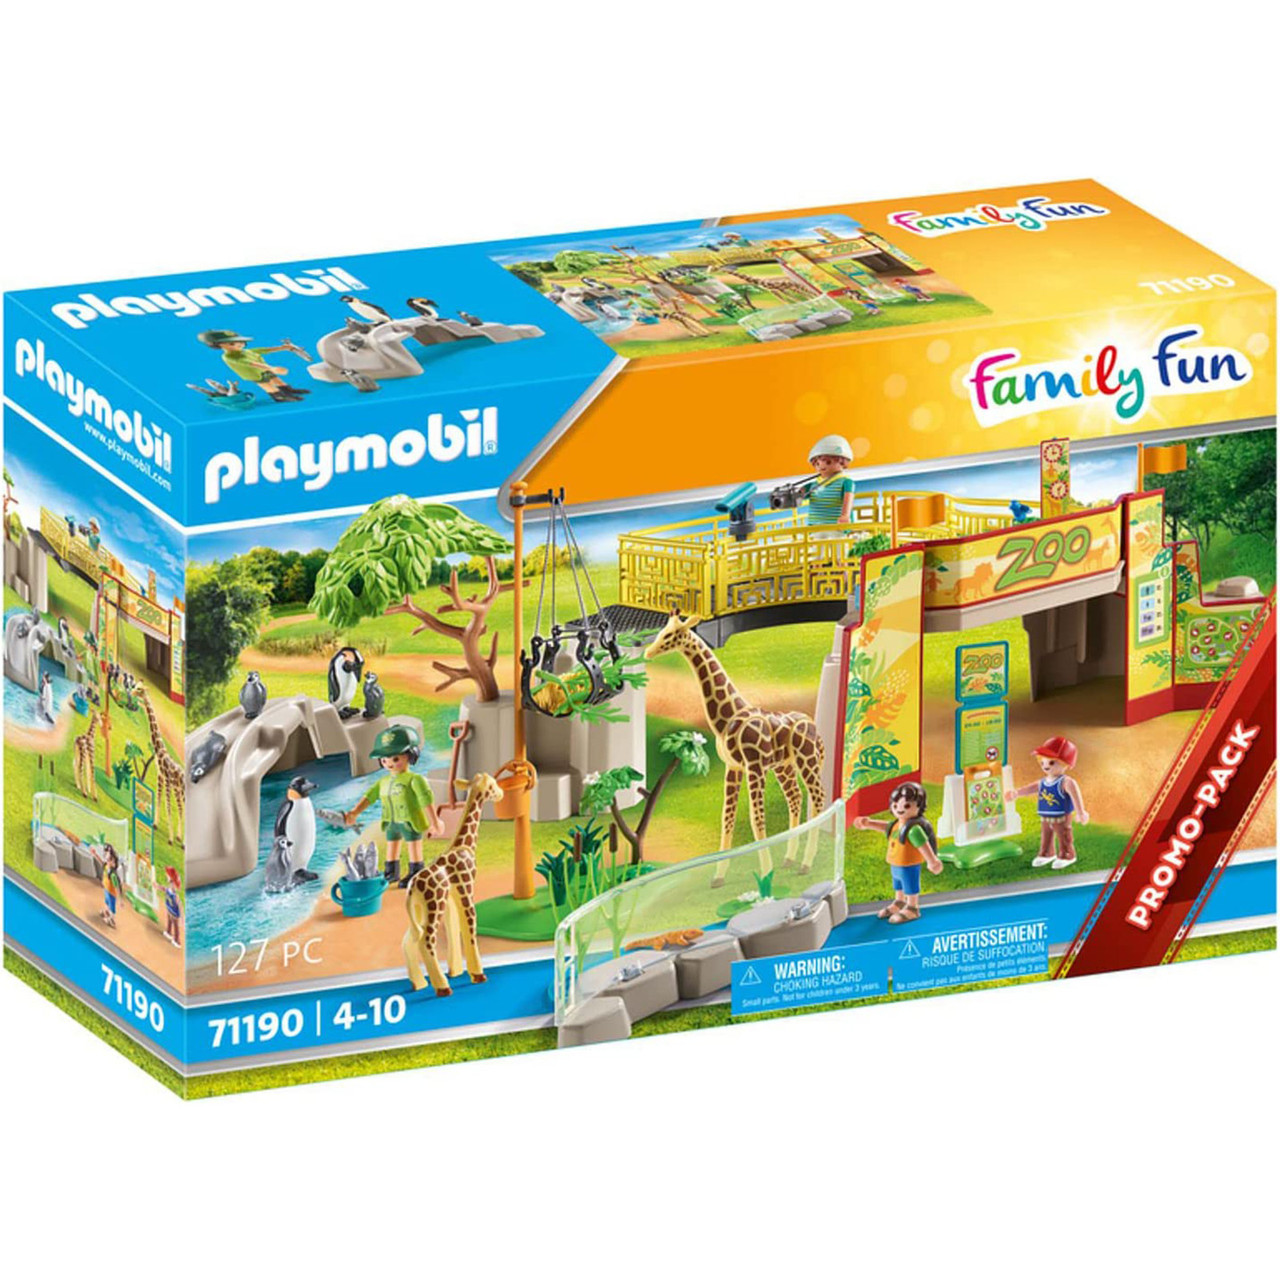 Playmobil: A Zoo Adventure Puzzle & Play 60 Piece Jigsaw Puzzle